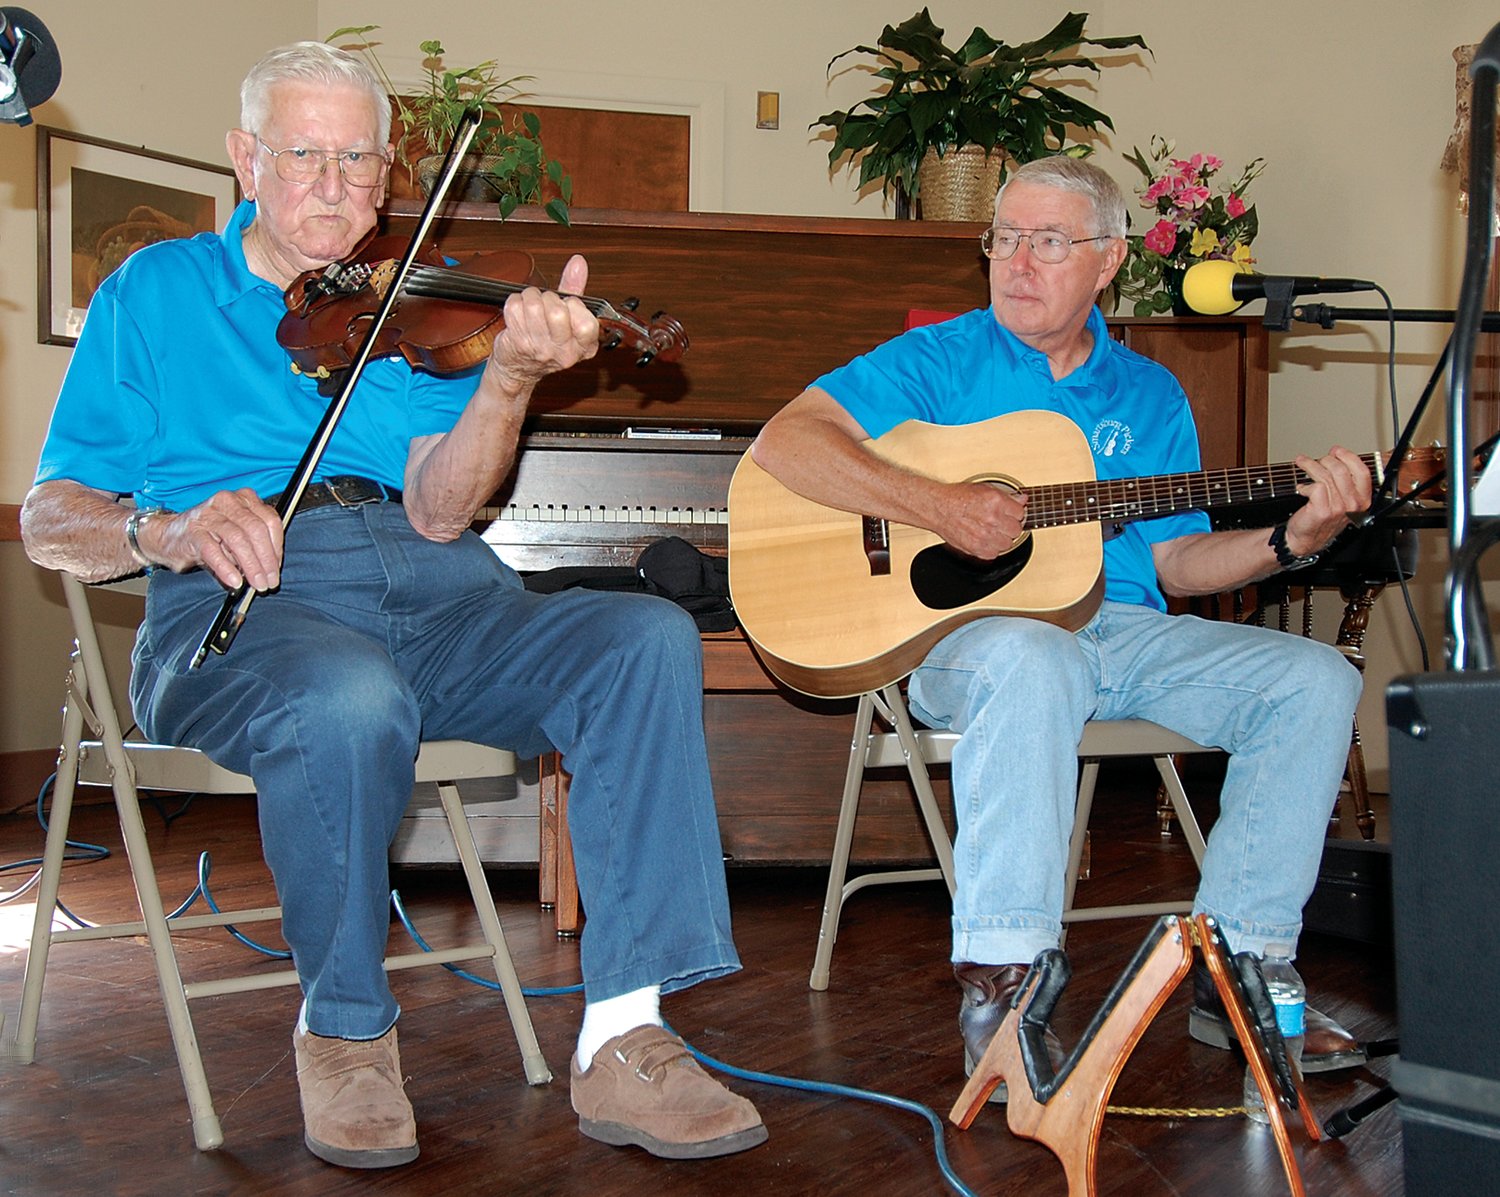 Archie Krout plays the fiddle while Alan Froedge plays the guitar during a 2014 performance of the Smartsburg Pickers at Williamsburg Healthcare.